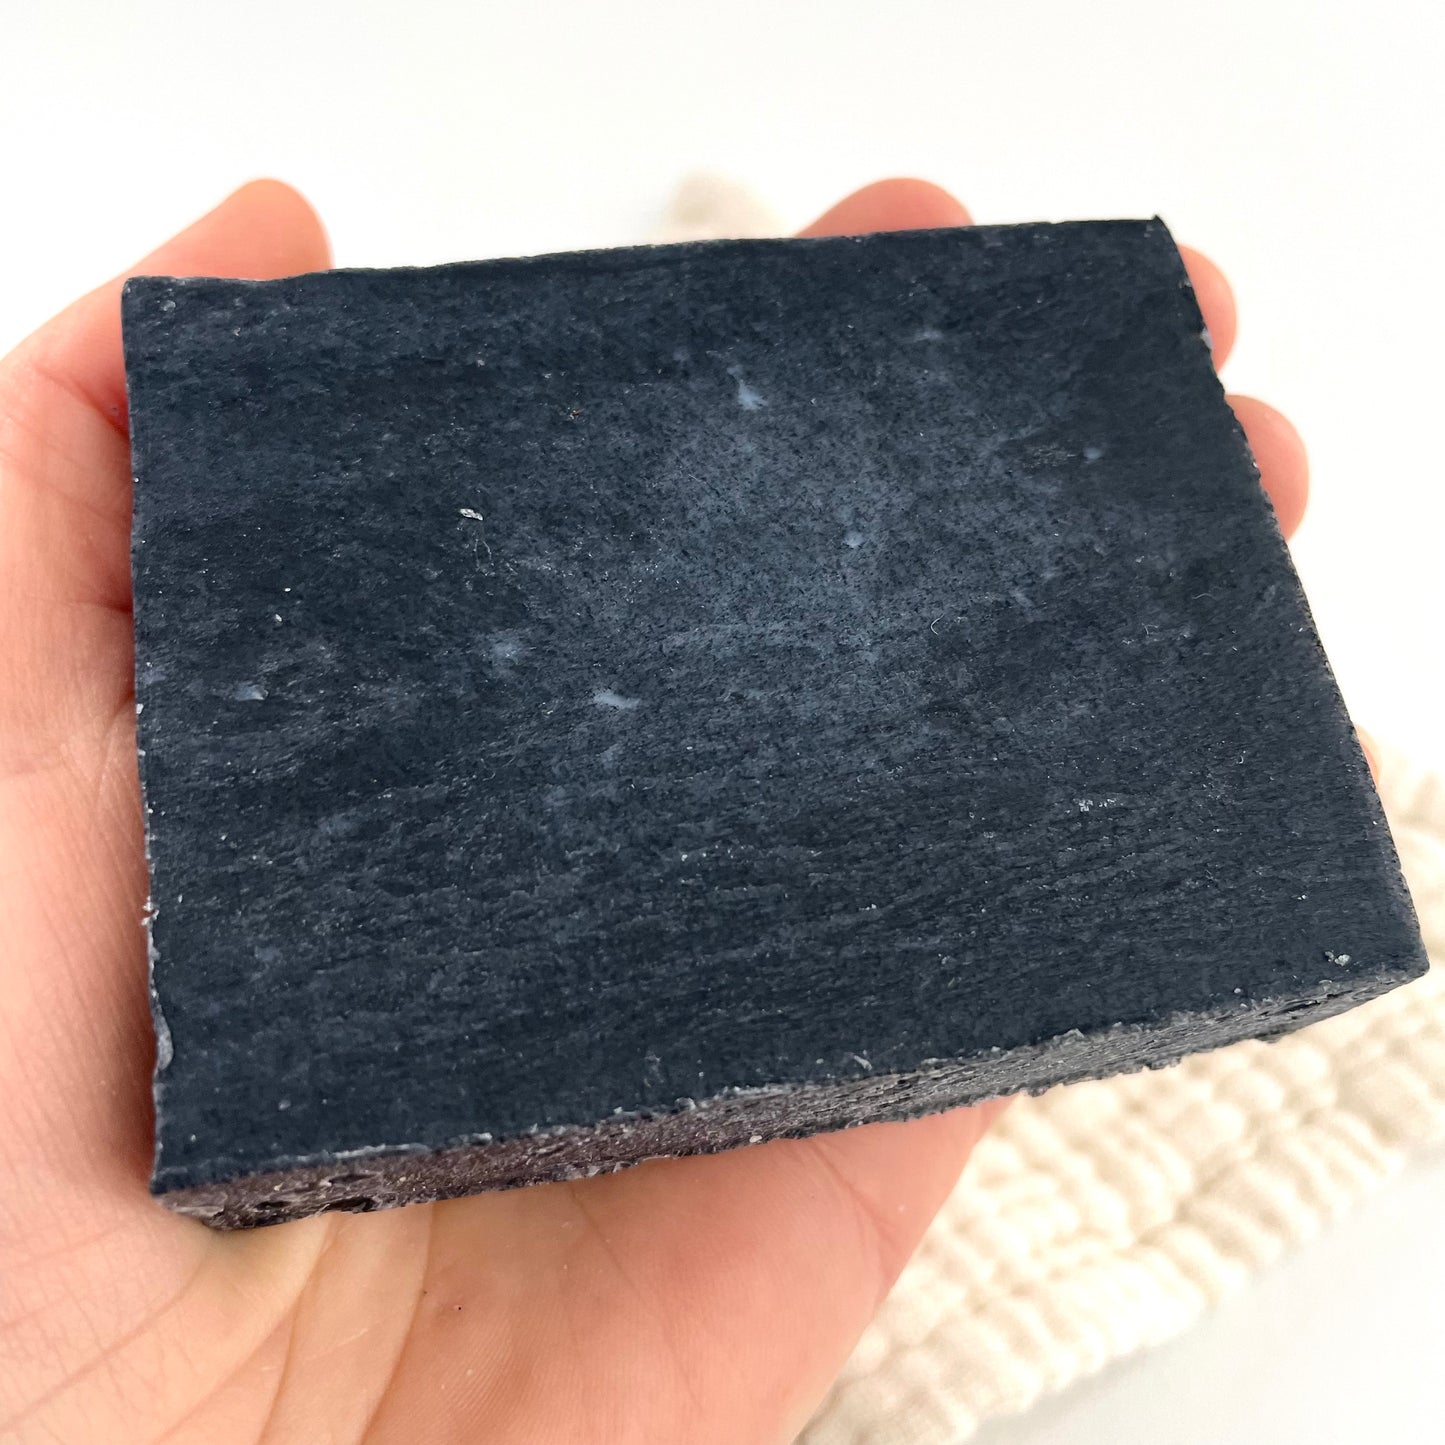 activated charcoal hand poured soap bar